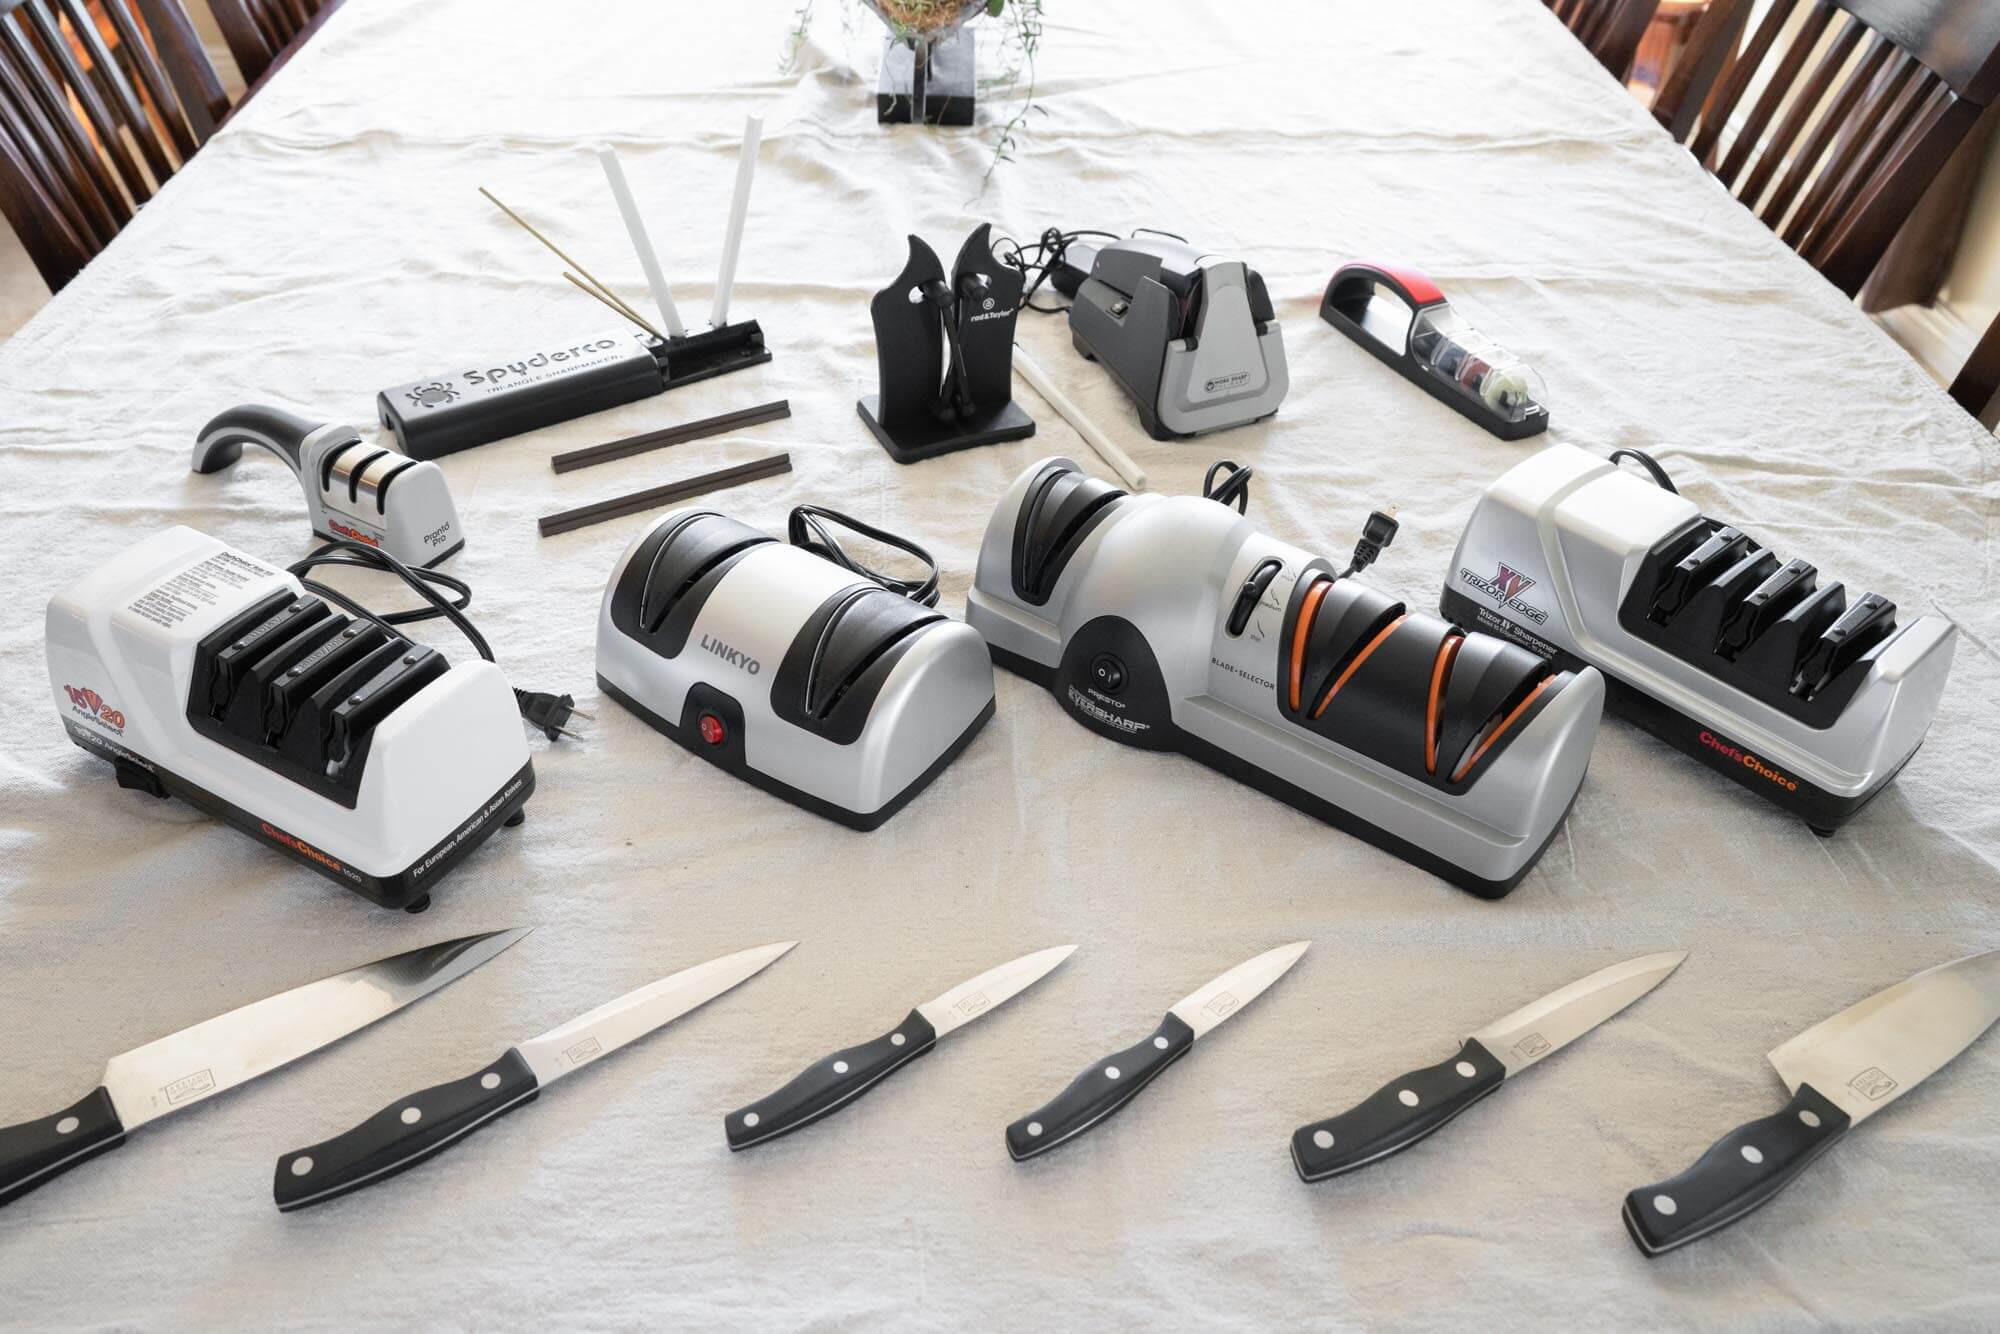 Ground of knife sharpeners on table